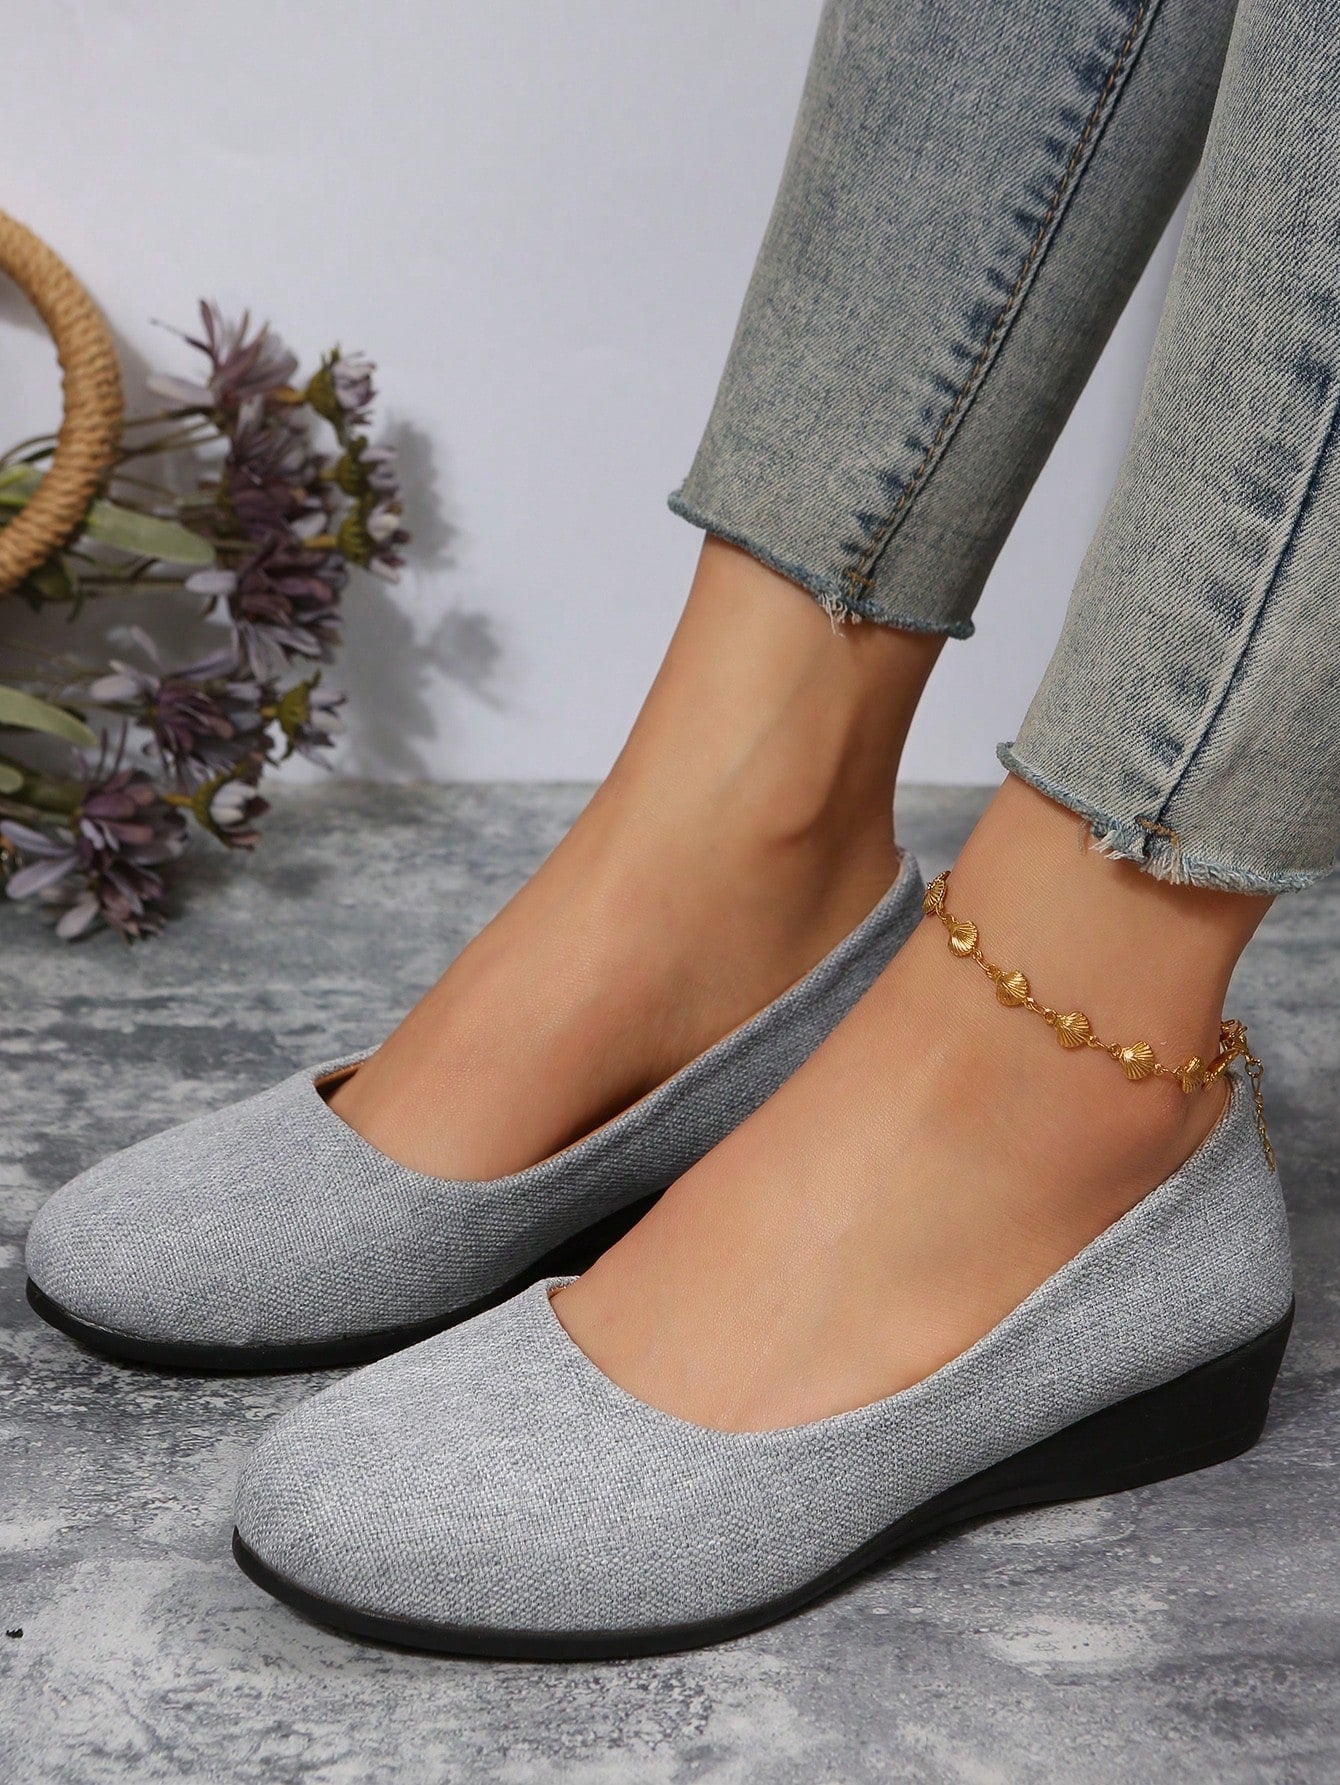 Women Fashionable Classic Comfortable Casual Small Wedge Heel Backstrap Flat Mom Shoes, Suitable For Any Occasion-Grey-1